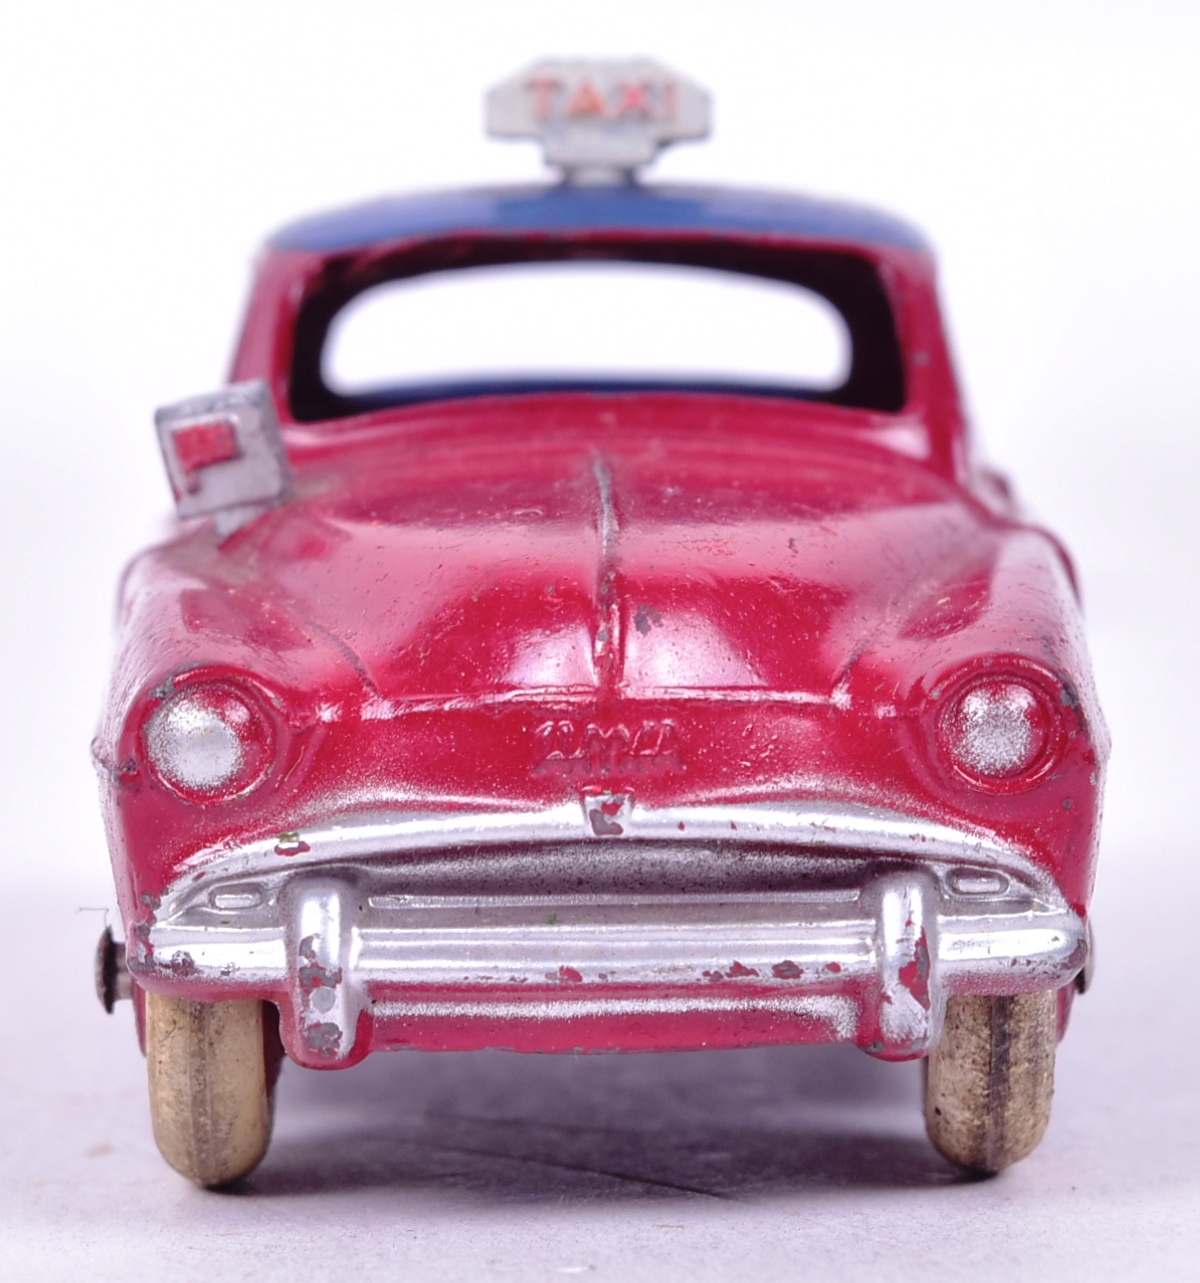 DIECAST - FRENCH DINKY TOYS - SIMCA 9 ARONDE - Image 4 of 5